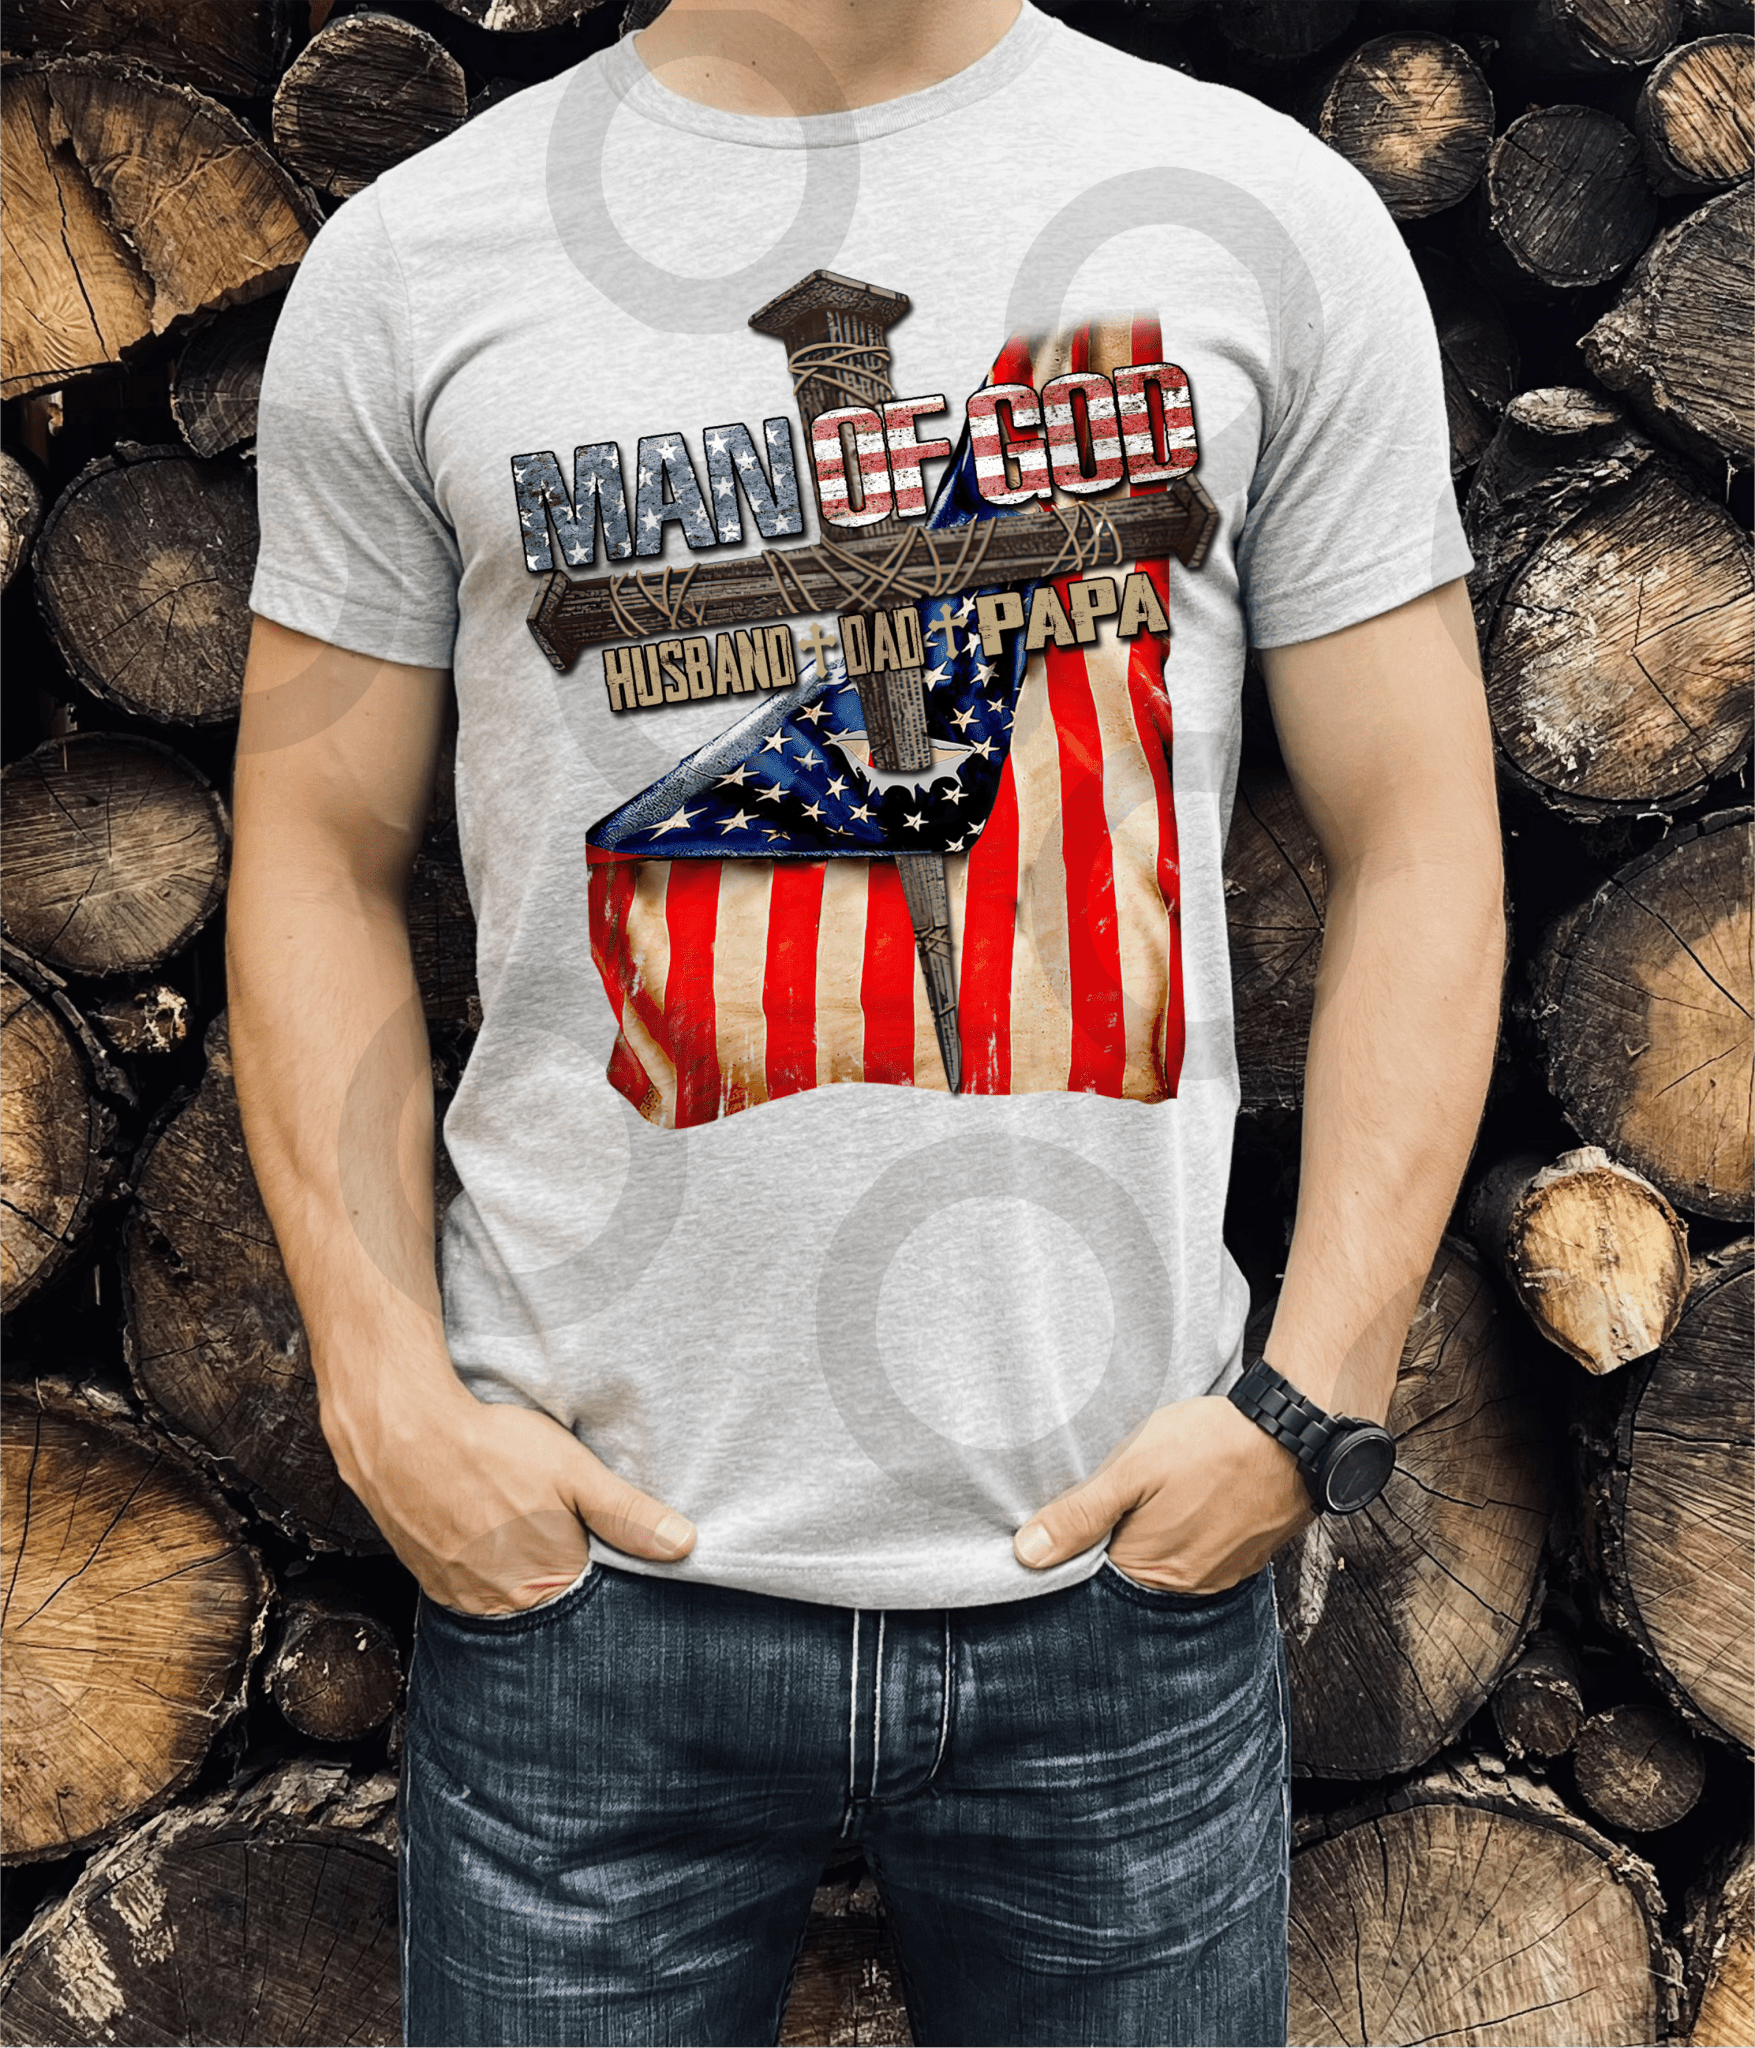 Man of GOD Husband Dad Papa Cross American Flag size ADULT 11x13 DTF TRANSFERPRINT TO ORDER - Do it yourself Transfers